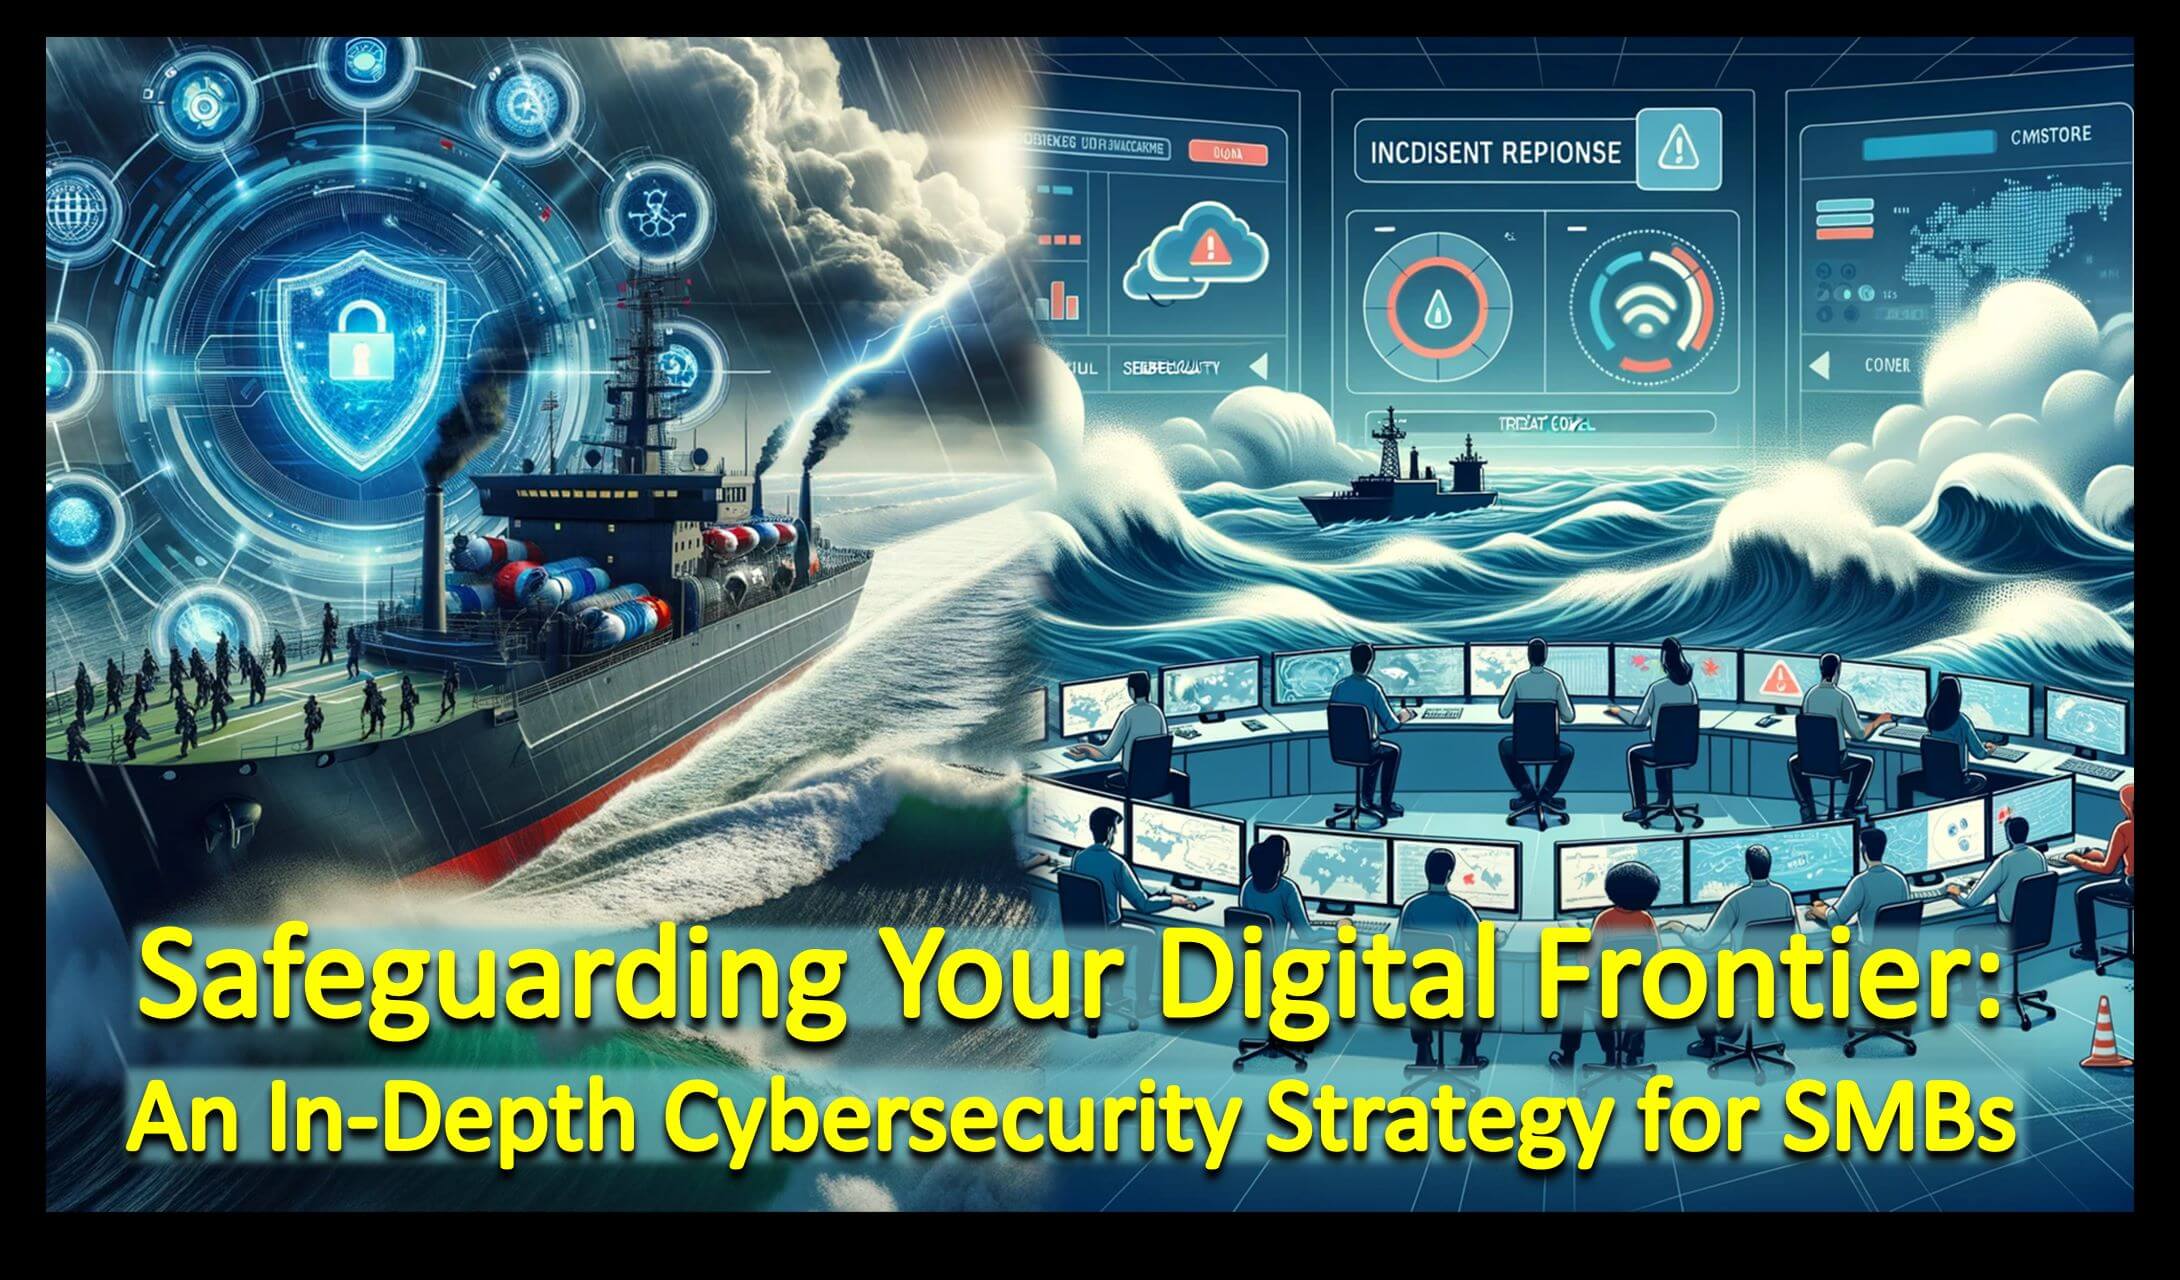 Safeguarding Your Digital Frontier: An In-Depth Cybersecurity Strategy for SMBs